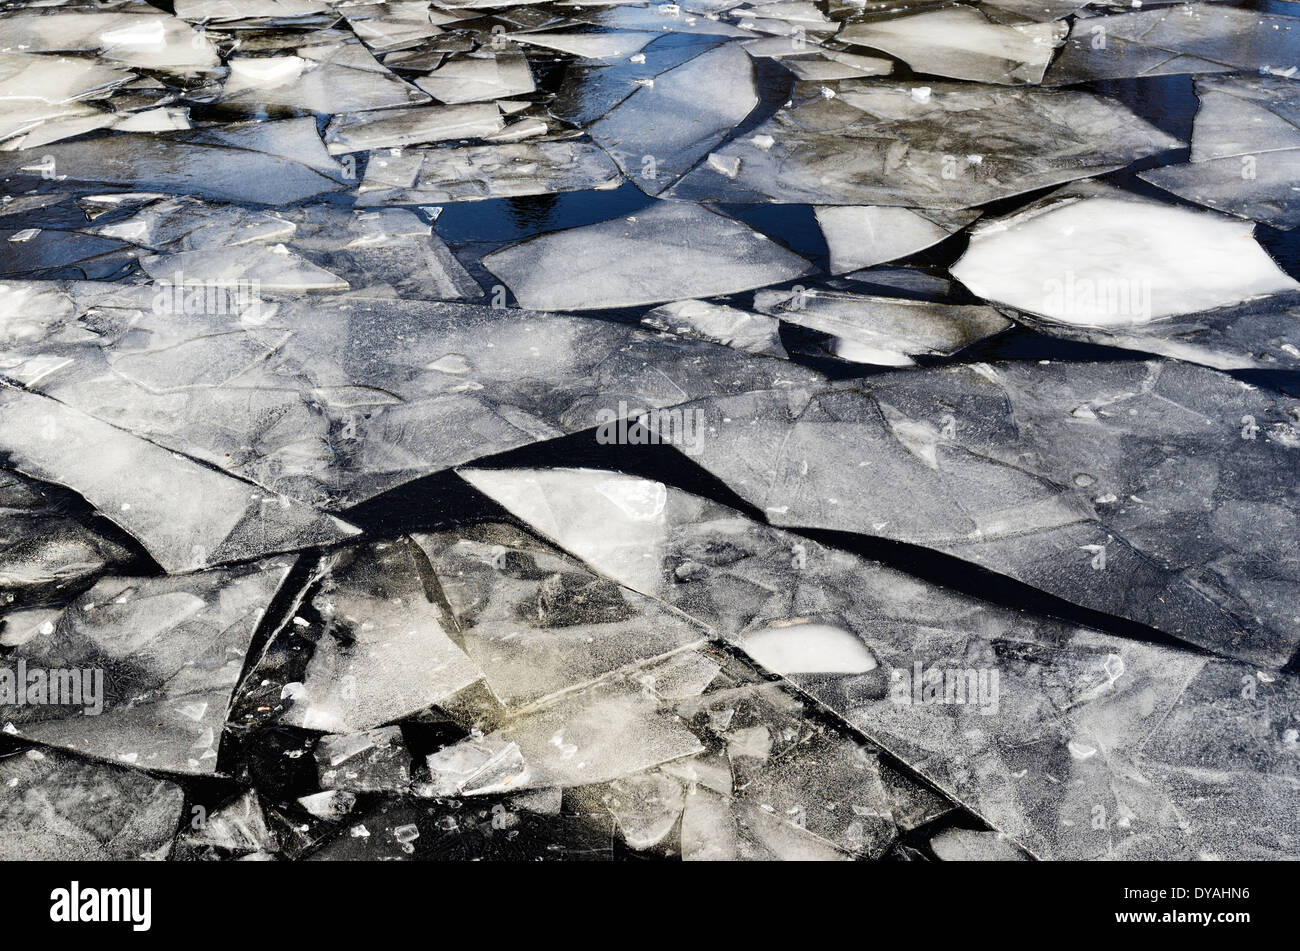 ice-field on the lake in winter, horizontal Stock Photo